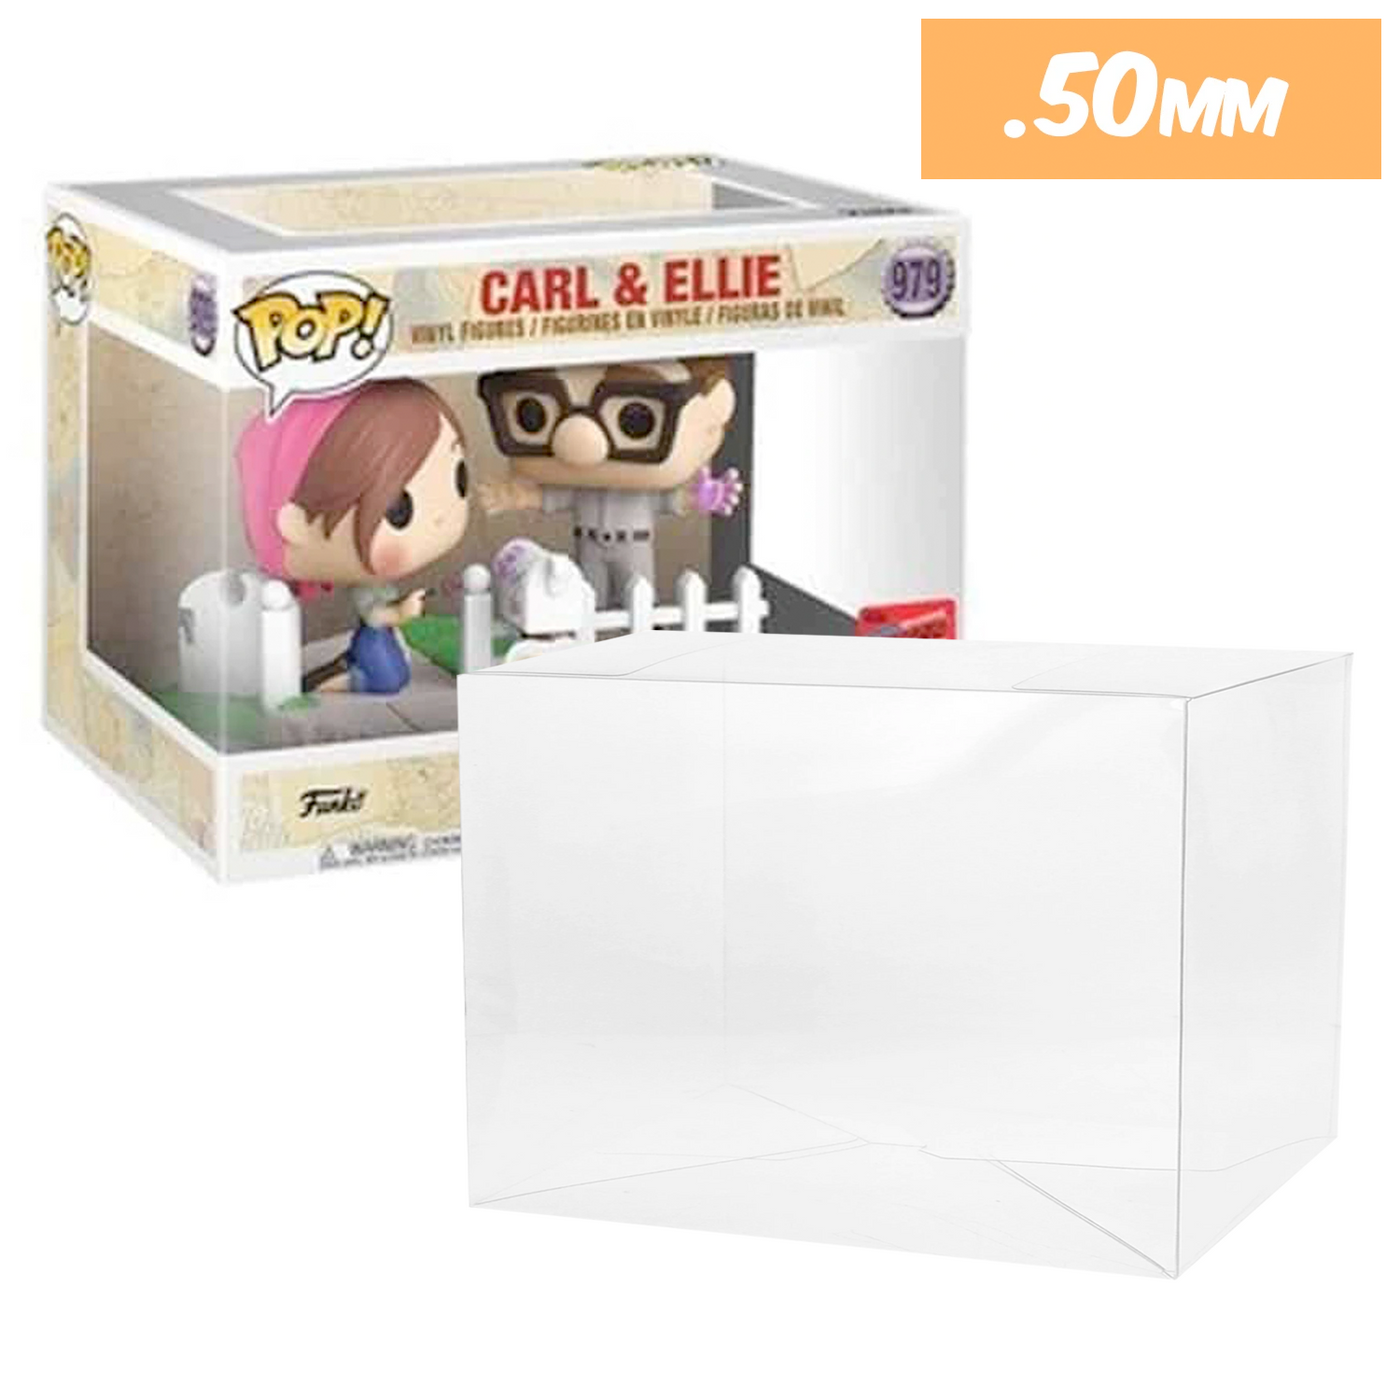 nycc carl and ellie pop moment best funko pop protectors thick strong uv scratch flat top stack vinyl display geek plastic shield vaulted eco armor fits collect protect display case kollector protector